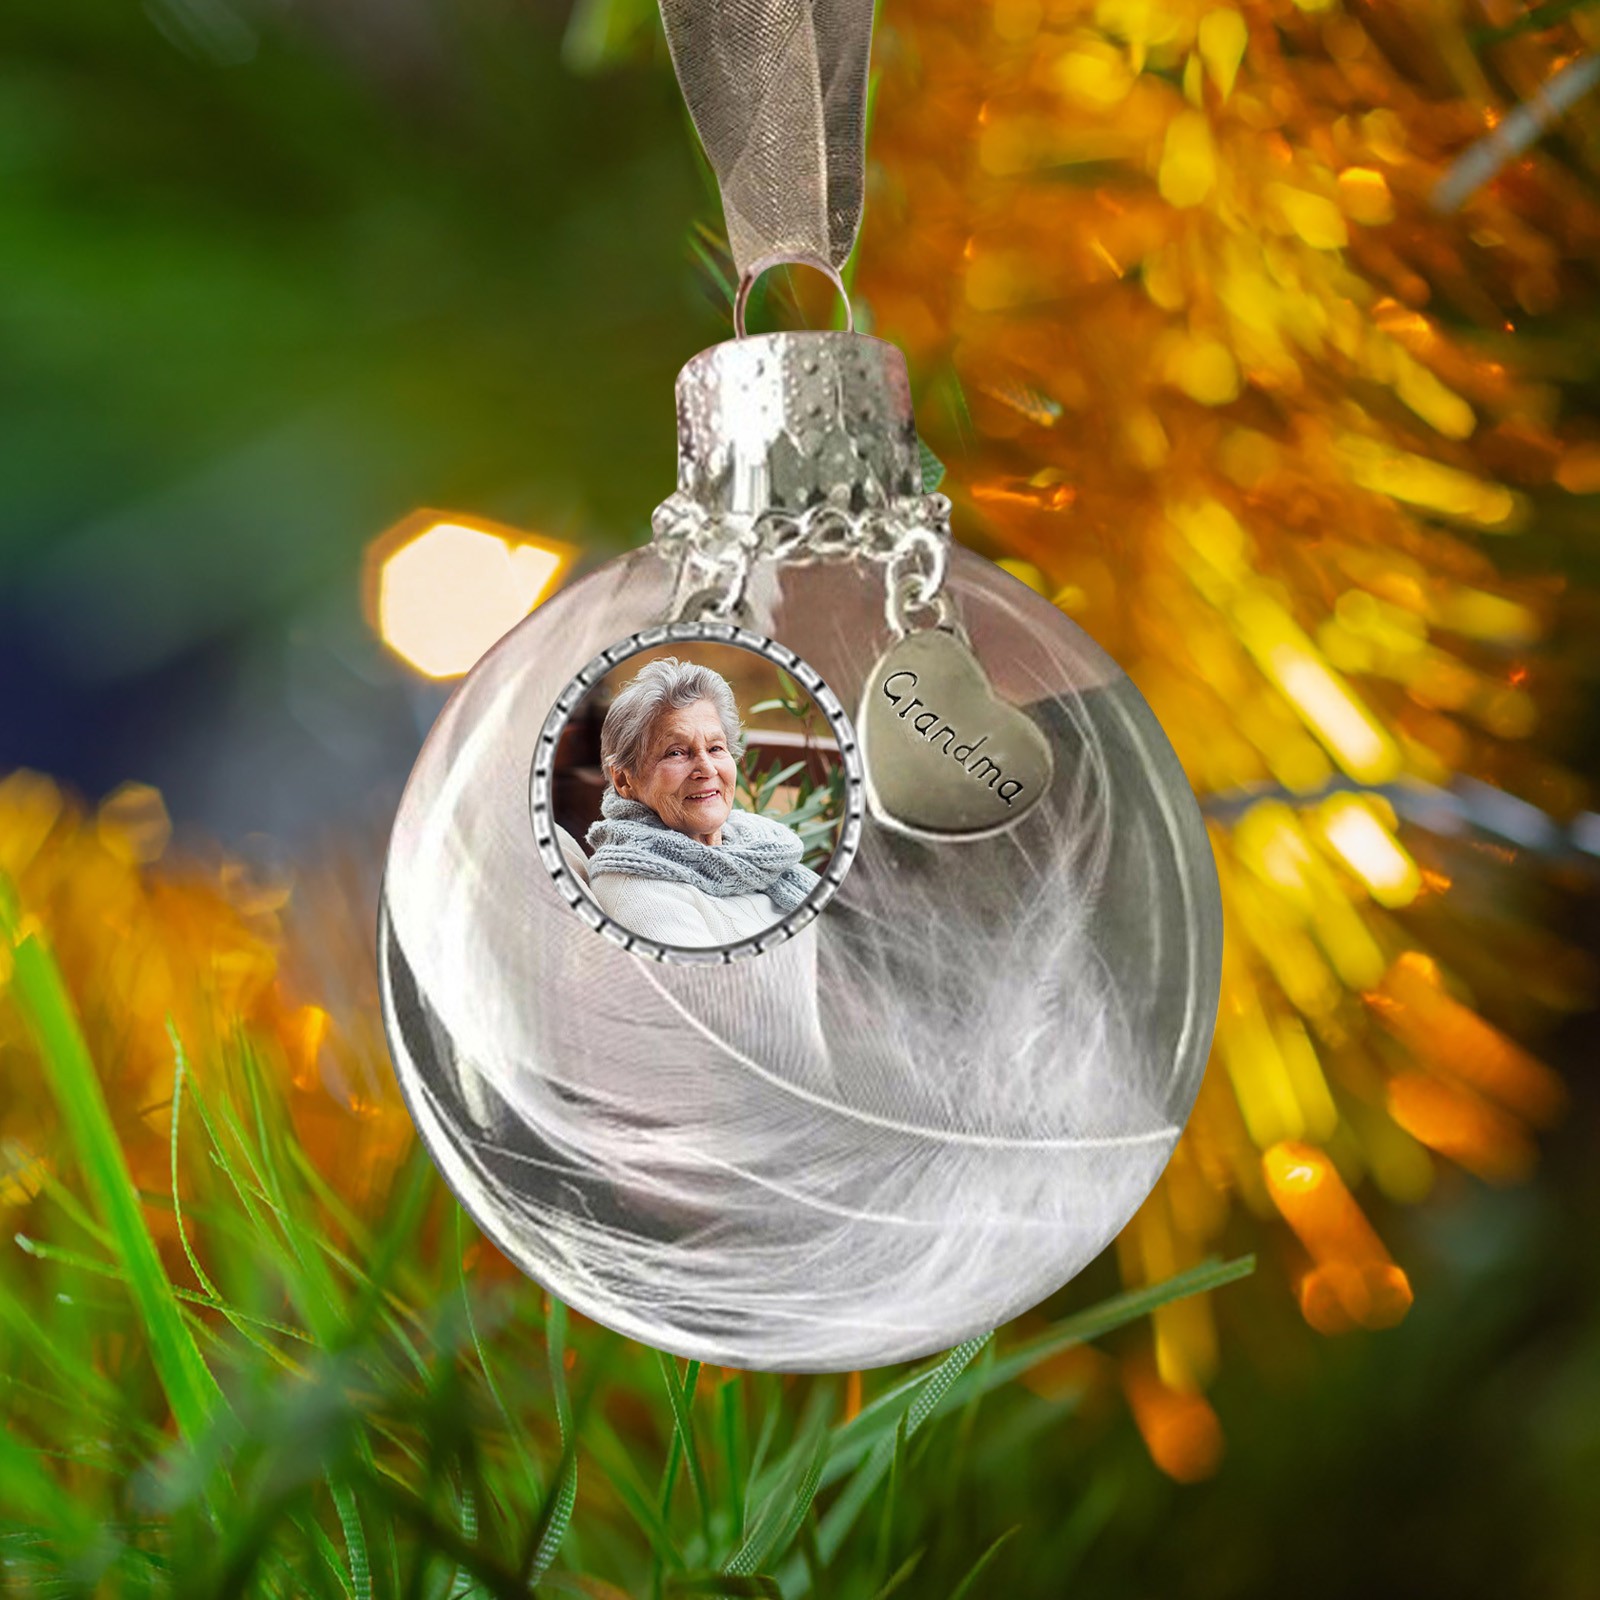 Clear Christmas Ornament Feather Ball, A Piece of My Heart is in